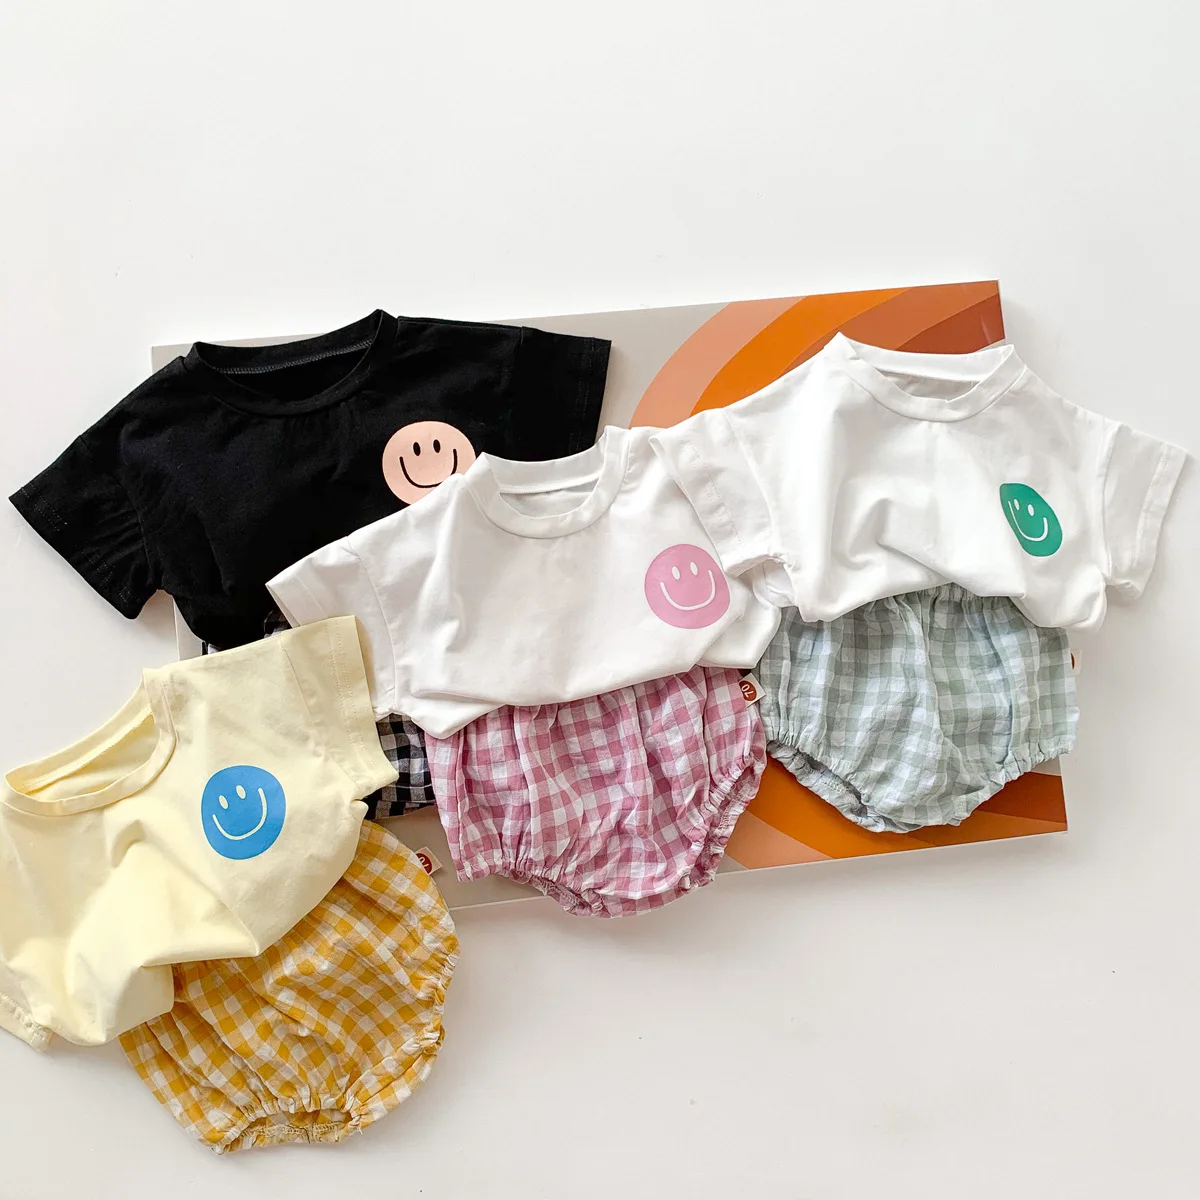 Baby Clothing New Summer Girls' Clothes Cotton Cute Smiling Face Children's T-shirt Shorts Two Piece Set Newborn Boy Baby Suit